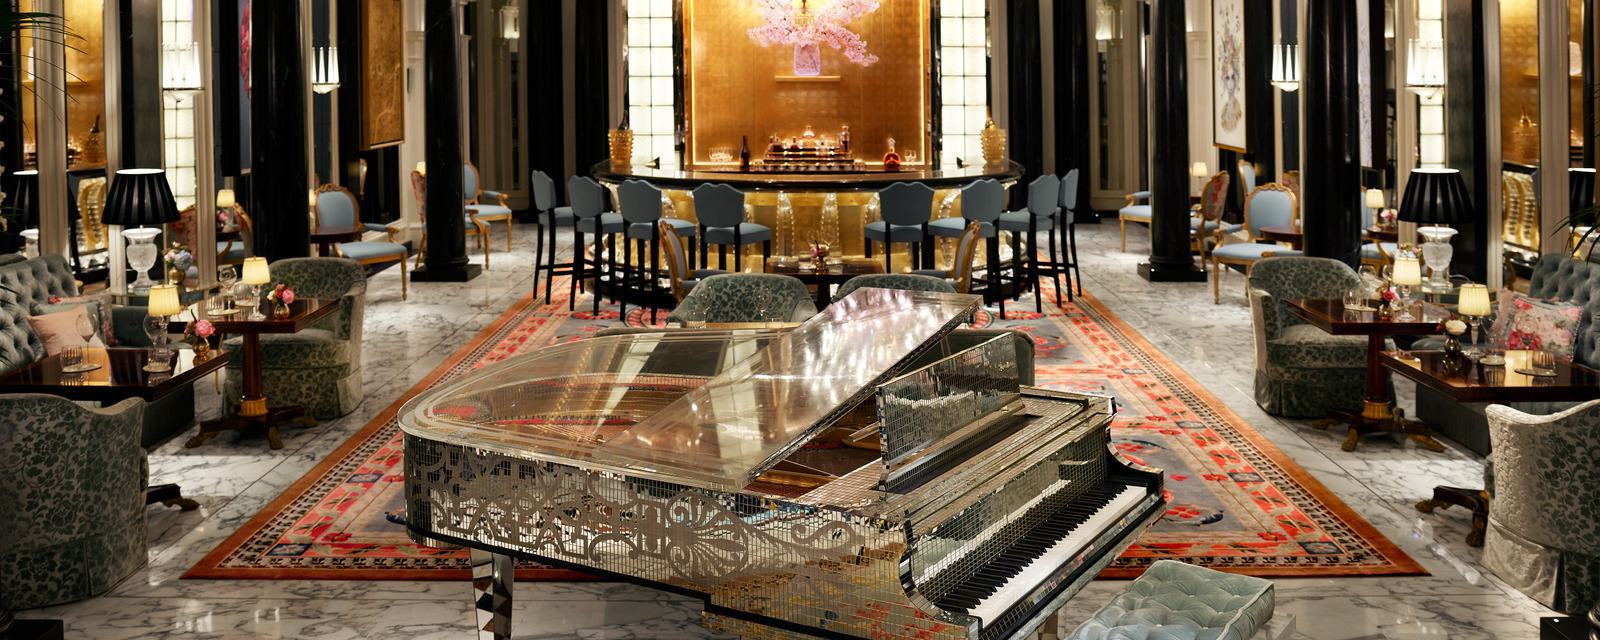 The Dorchester Hotel - bar area with mirrored grand piano in the foreground